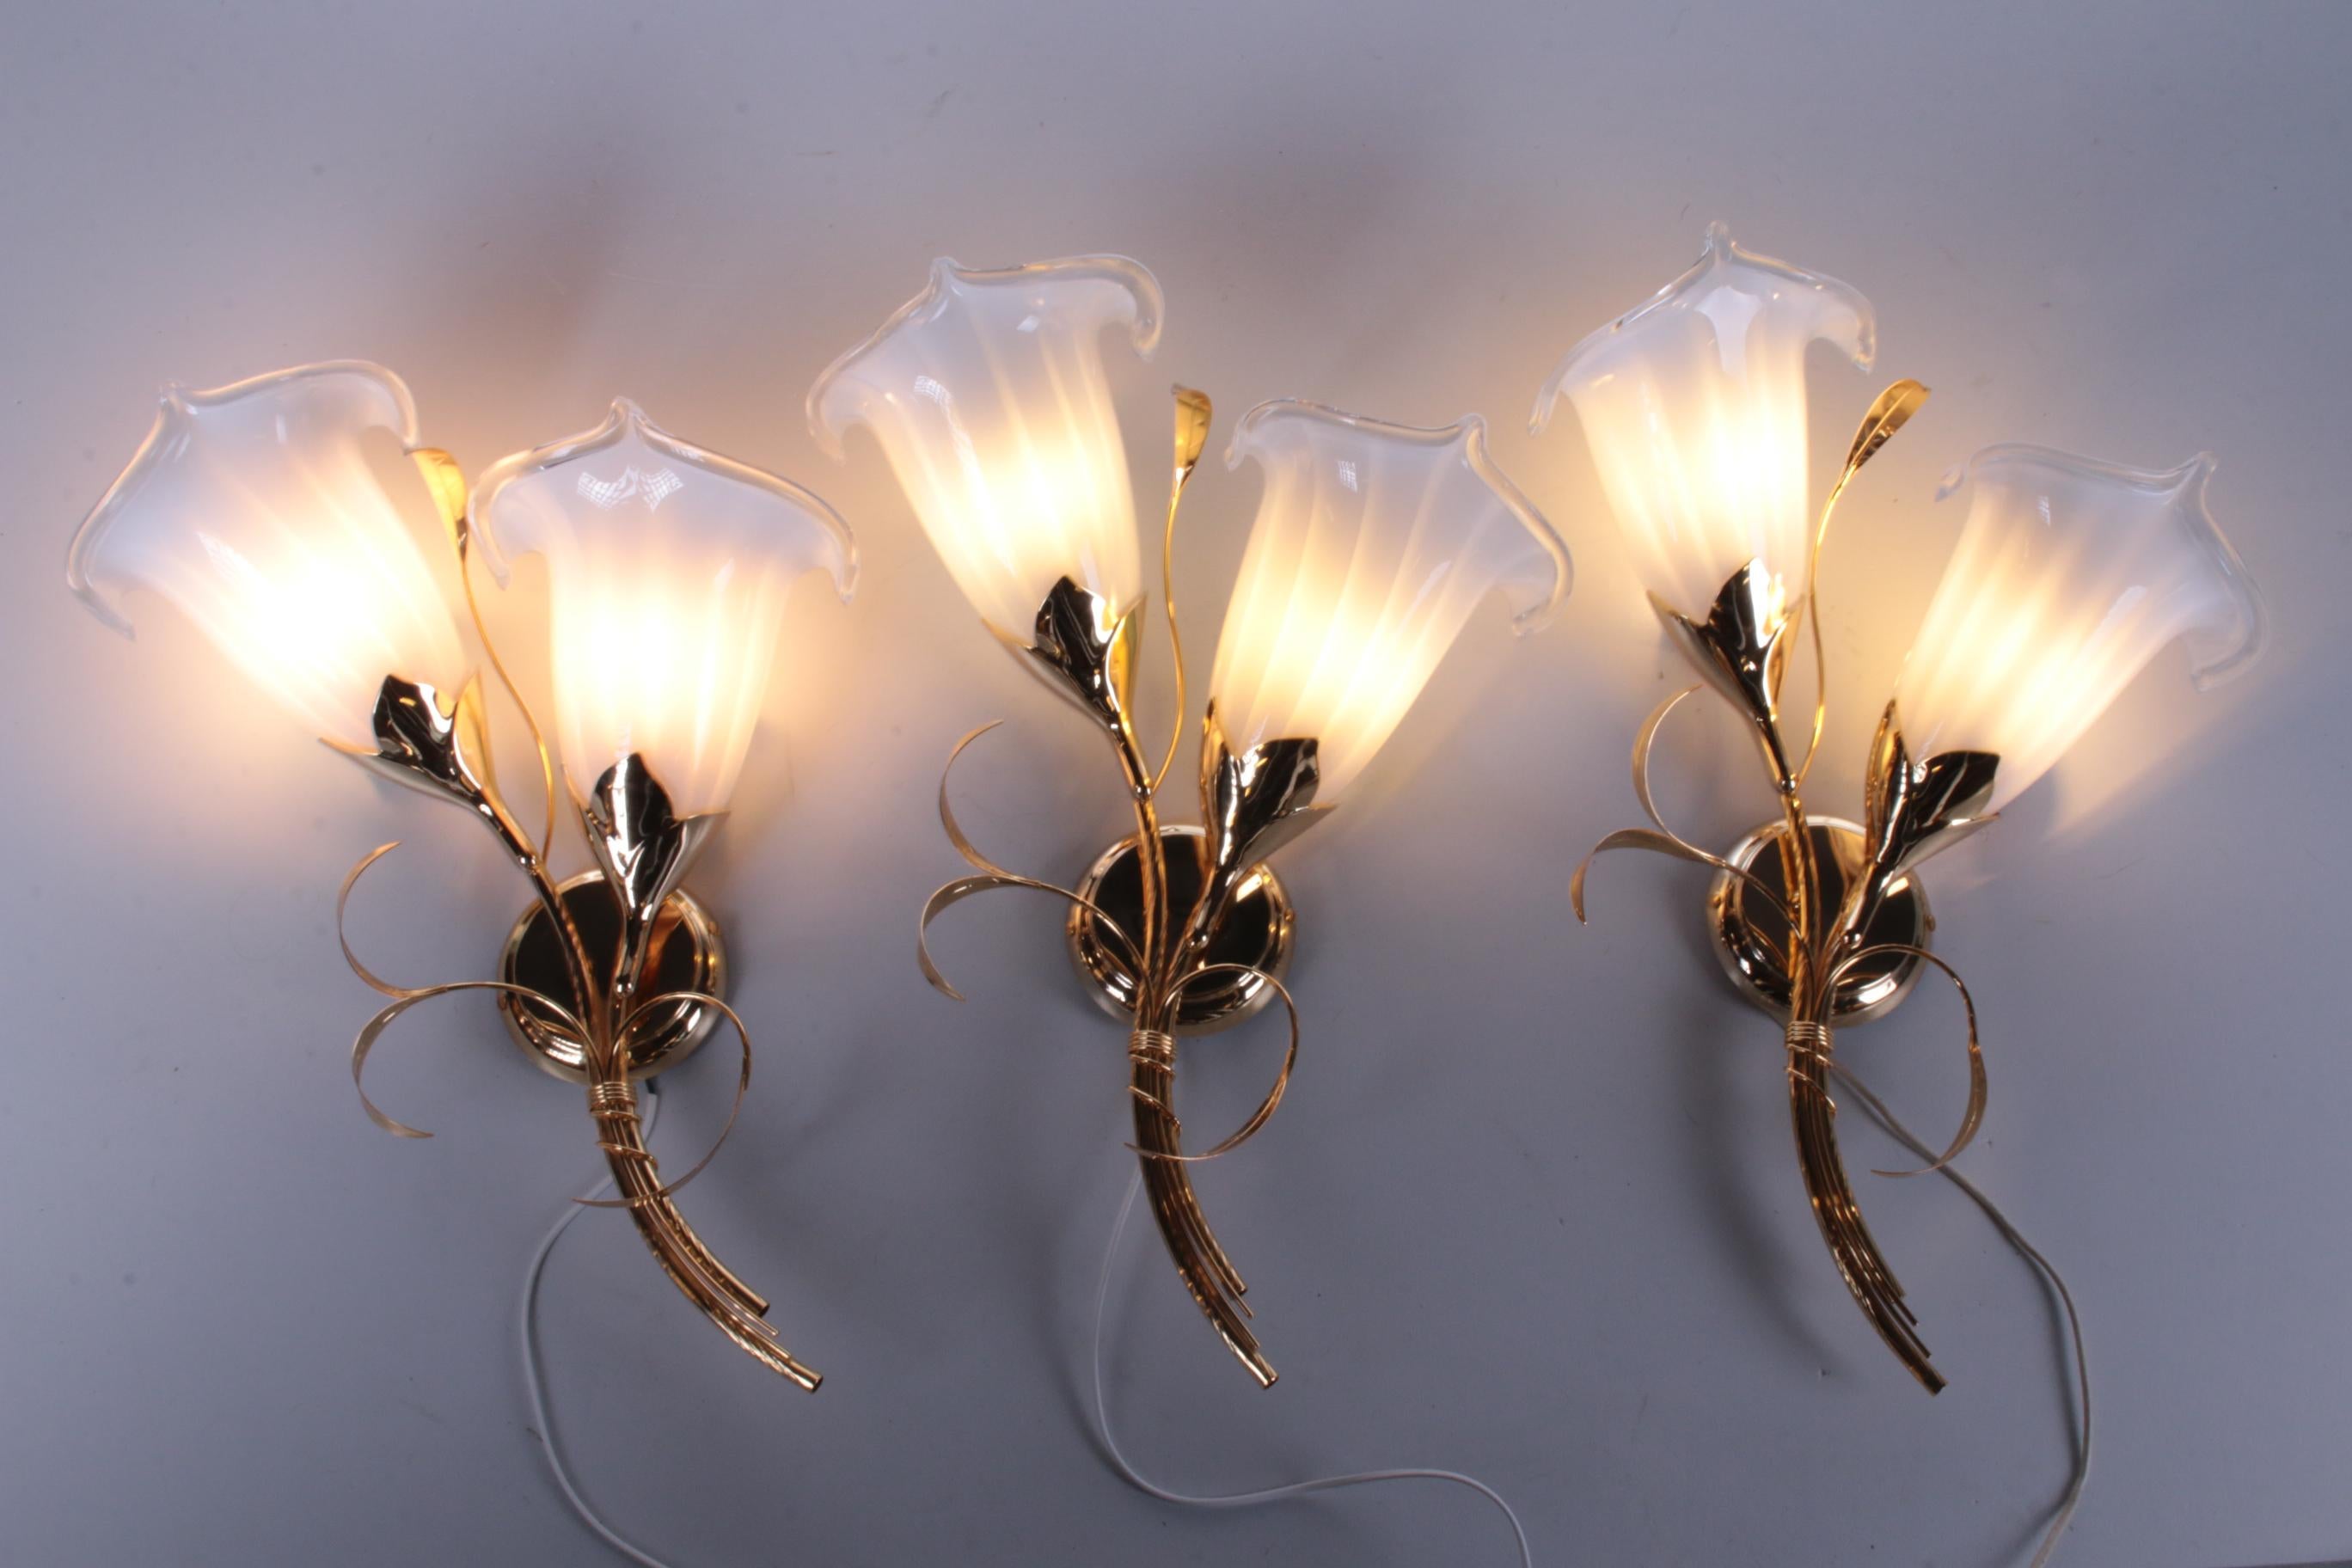 24 kt gold-plated tulip glass wall lamps Italian design 1970

This is a beautiful Hollywood Regency set of three wall lamps.

Made of gold colored metal with beautiful Murano glass shades.

Can be mounted on the wall.

We only sell these